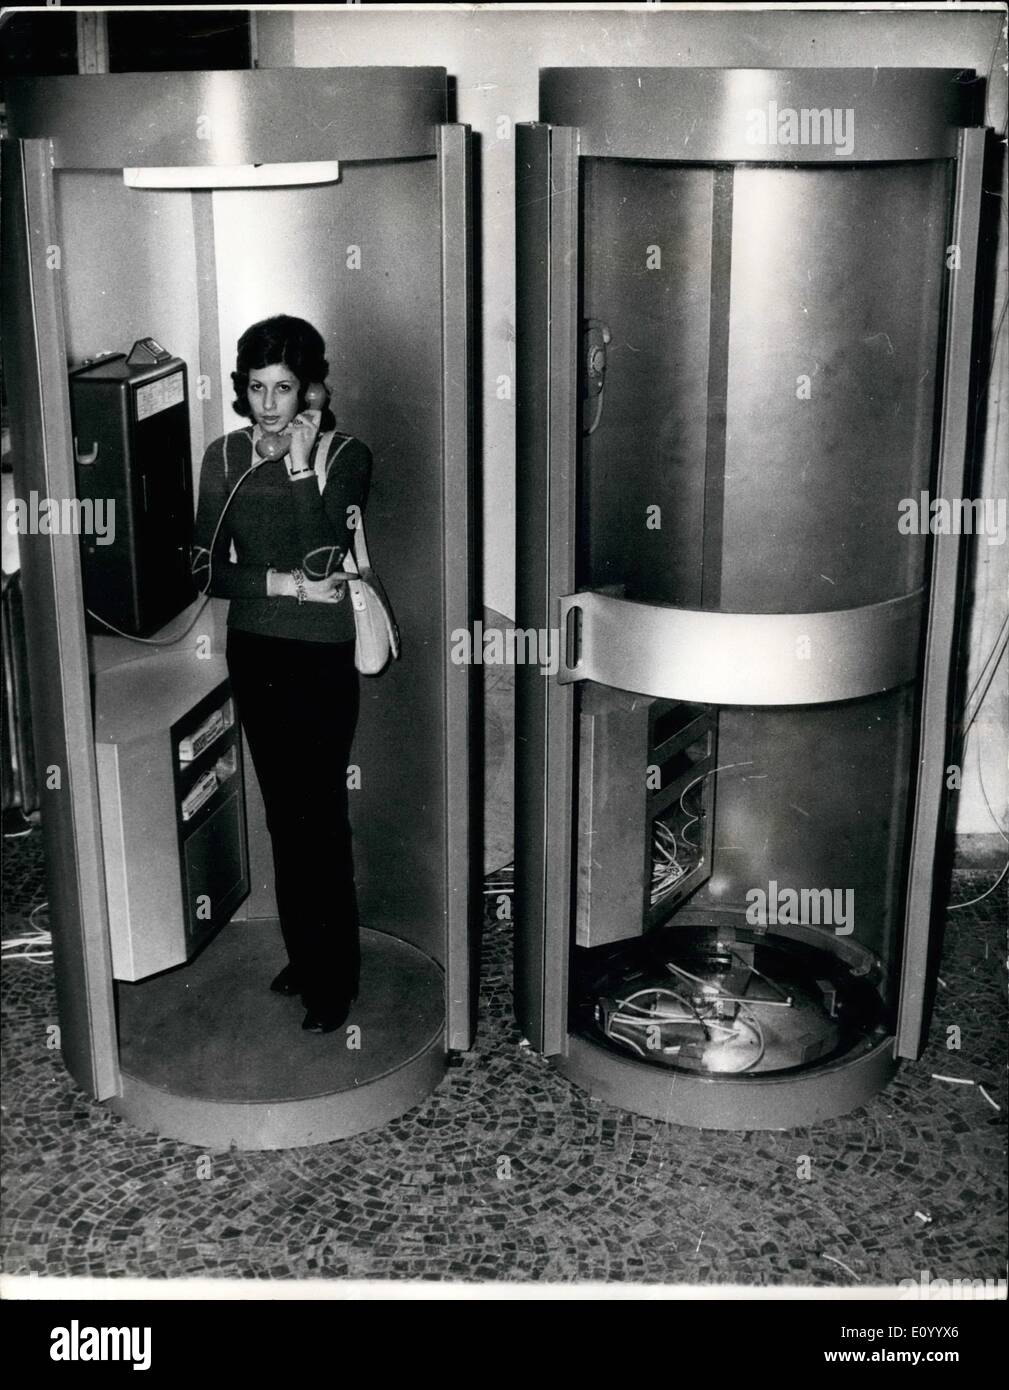 Dec. 12, 1971 - New Type Of Telephone Kiosks For Munich Olympic Site: Especially designed - the Federal Post Office are installing this new type of telephone kiosk for visitors to next year's Olympic Games in Munich. They are just over 6ft tall, and are constructed of steel and aluminum. The floor is covered by a fireproof fabric, and console for two directories can also be used as a desk and the round sliding door is made of safety glass. Stock Photo